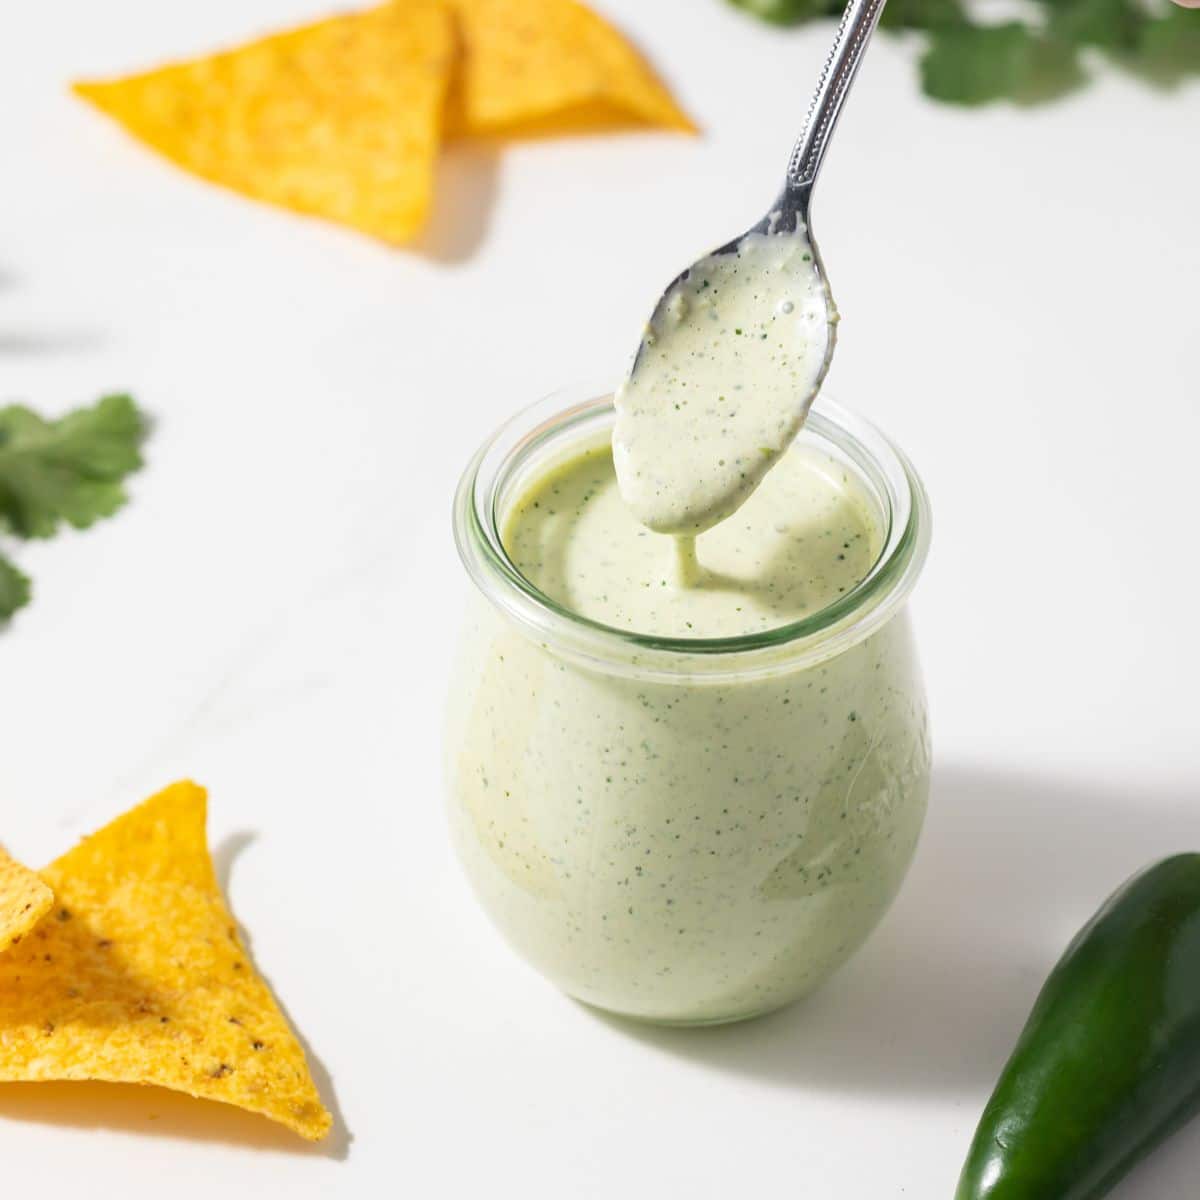 Creamy jalapeno sauce spooned out of a glass jar.